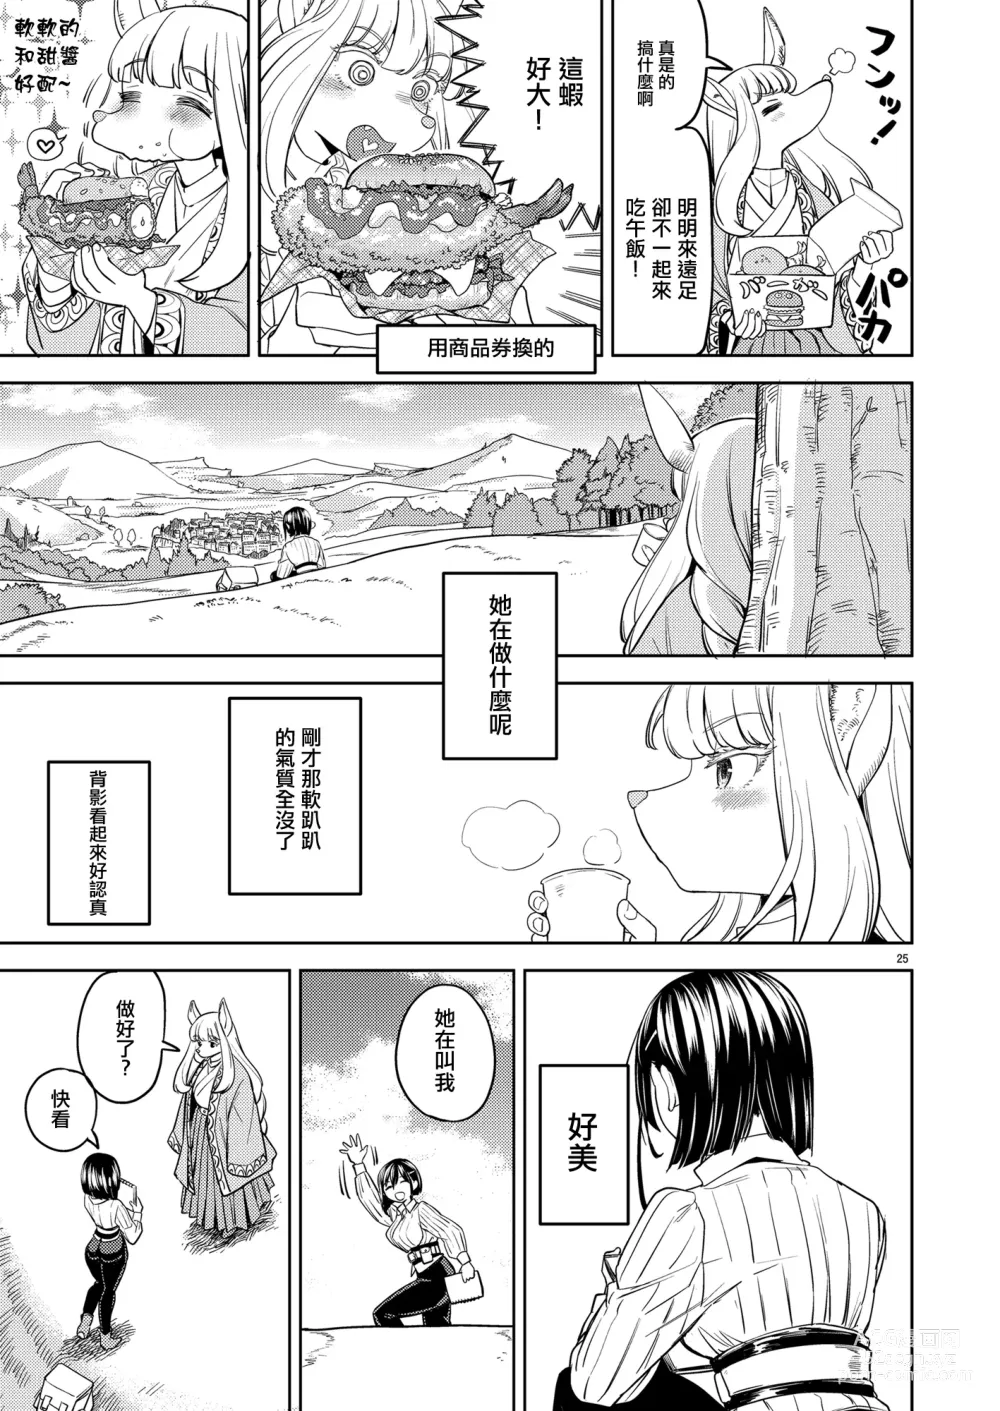 Page 29 of doujinshi 來一場蜜月旅行